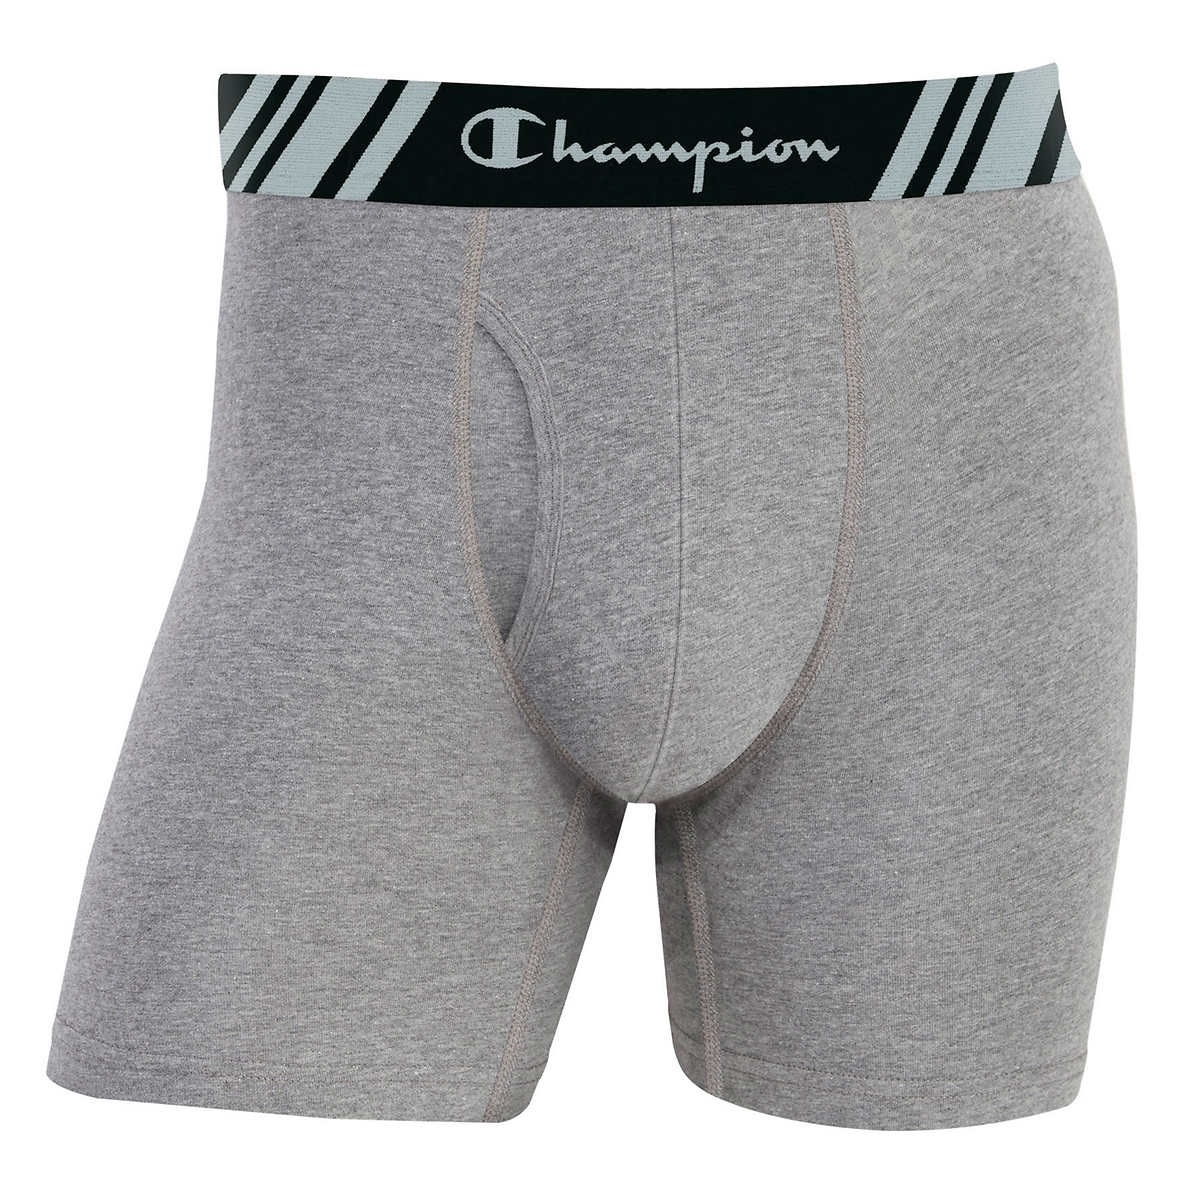 Champion Men's Boxer Brief, Large (Pack Of 5)